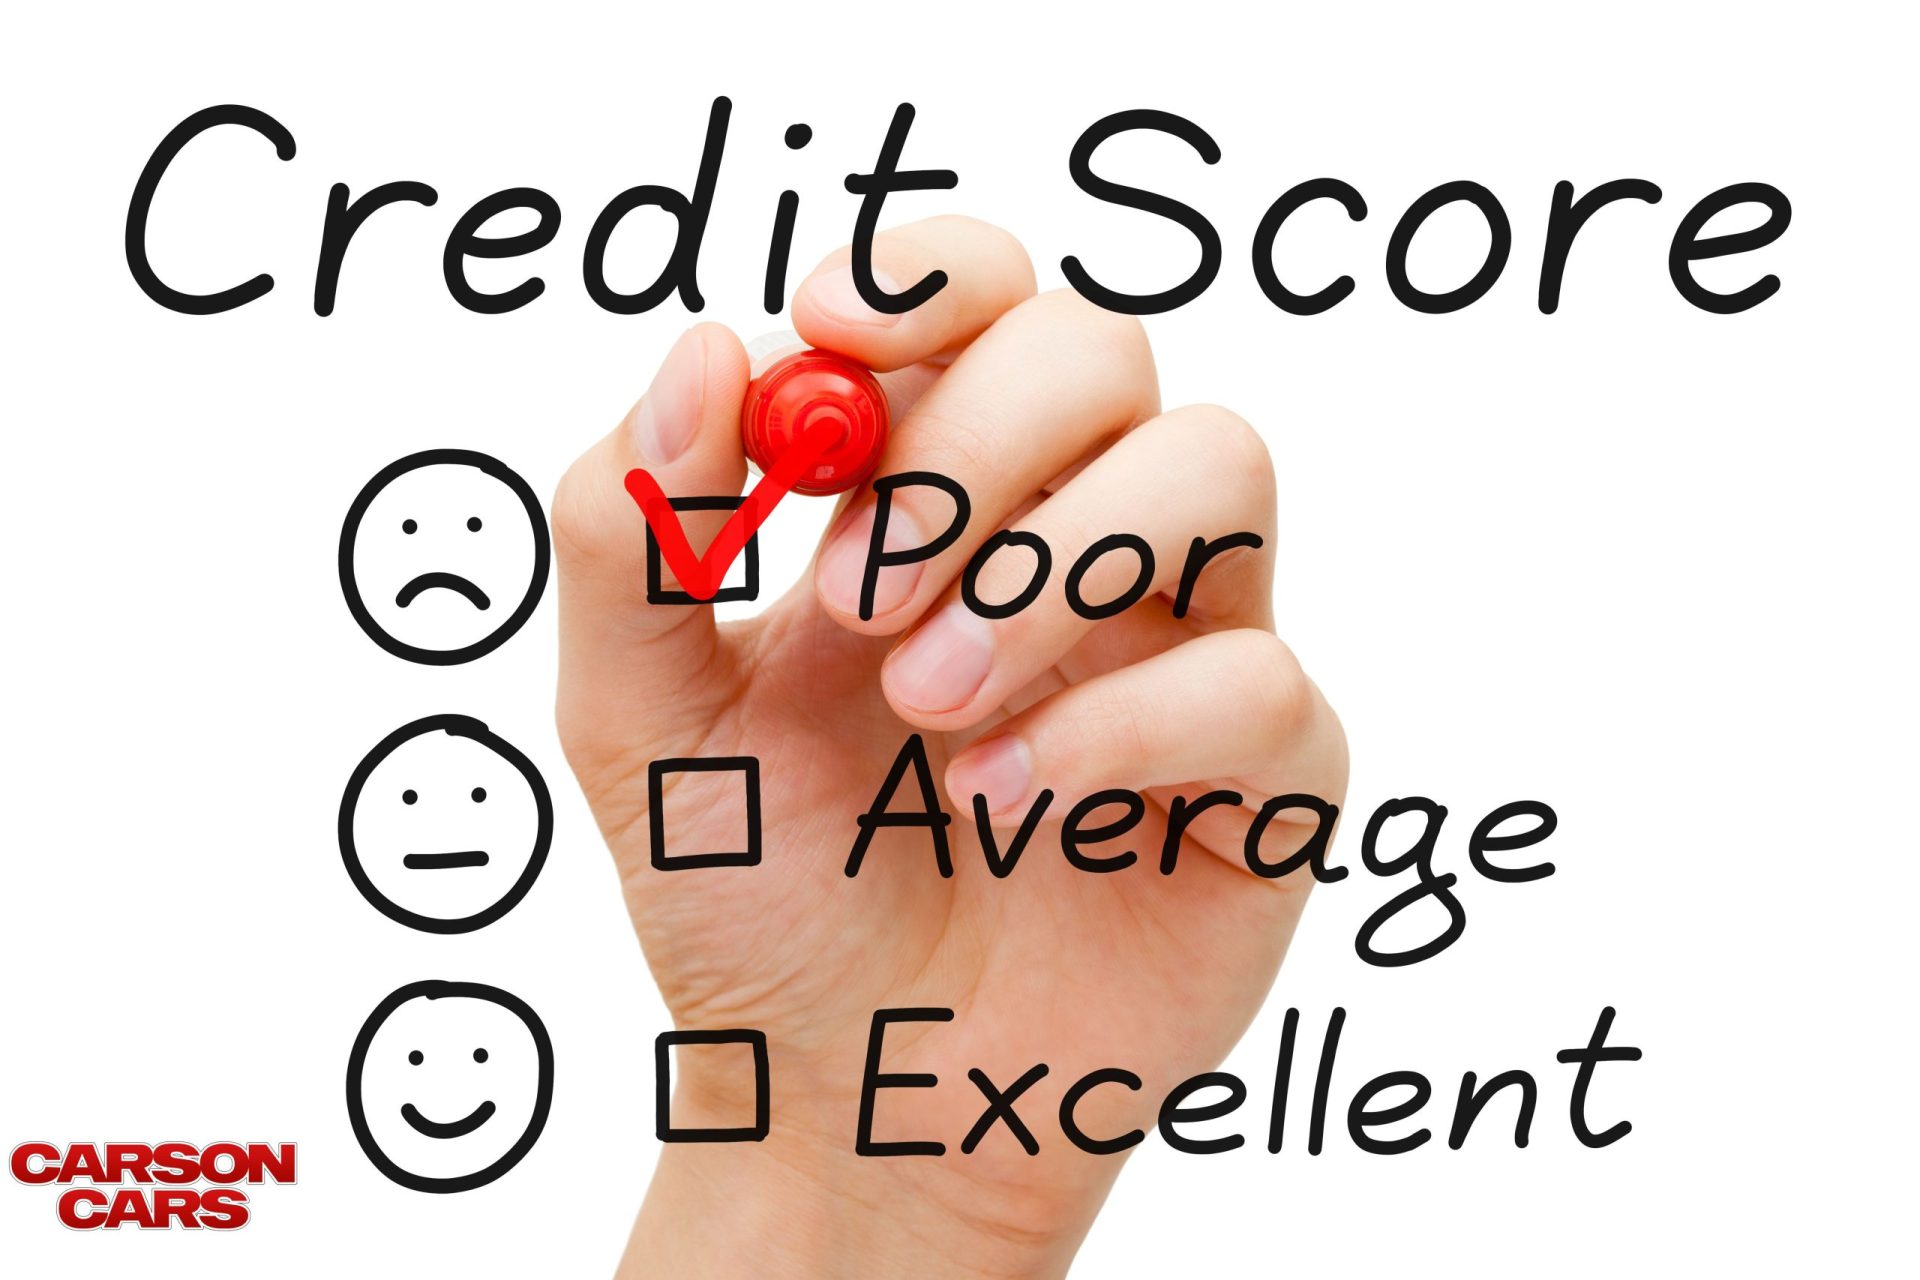 Poor Credit? These Used Car Buying Tips For Marysville Drivers Could Help!